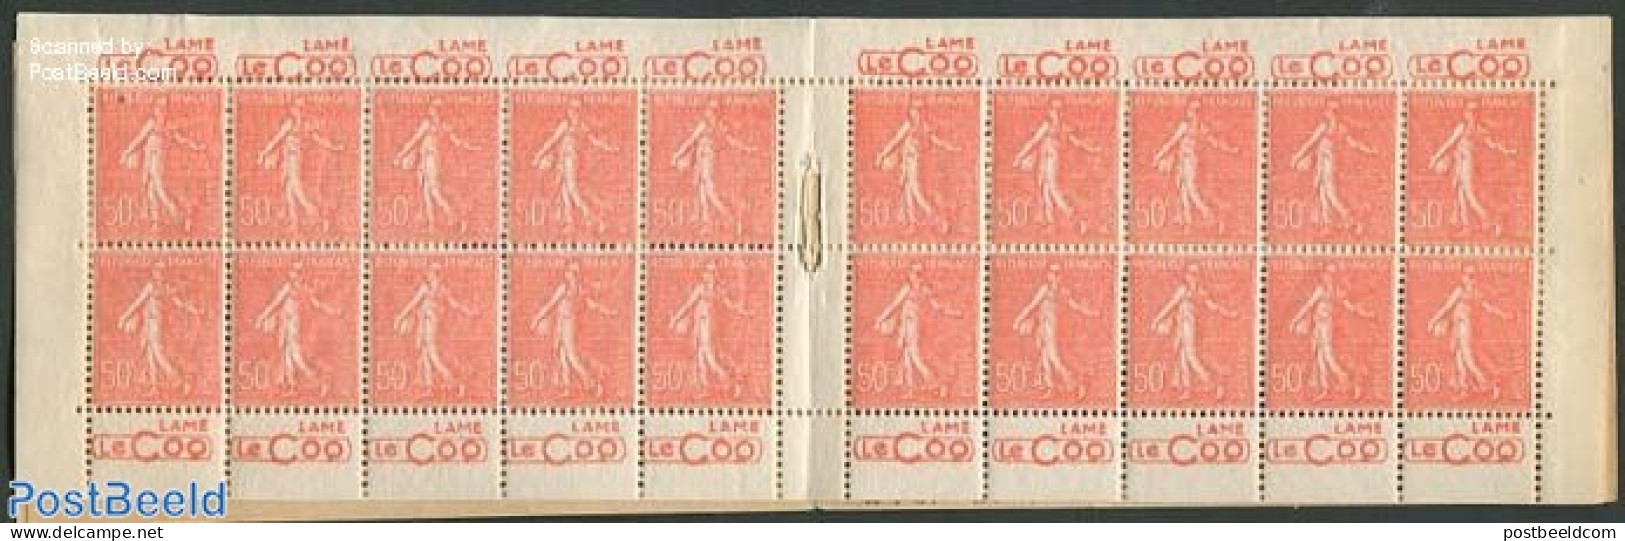 France 1924 20x50c Booklet (Lame Le Coq 4x), Mint NH, Stamp Booklets - Neufs